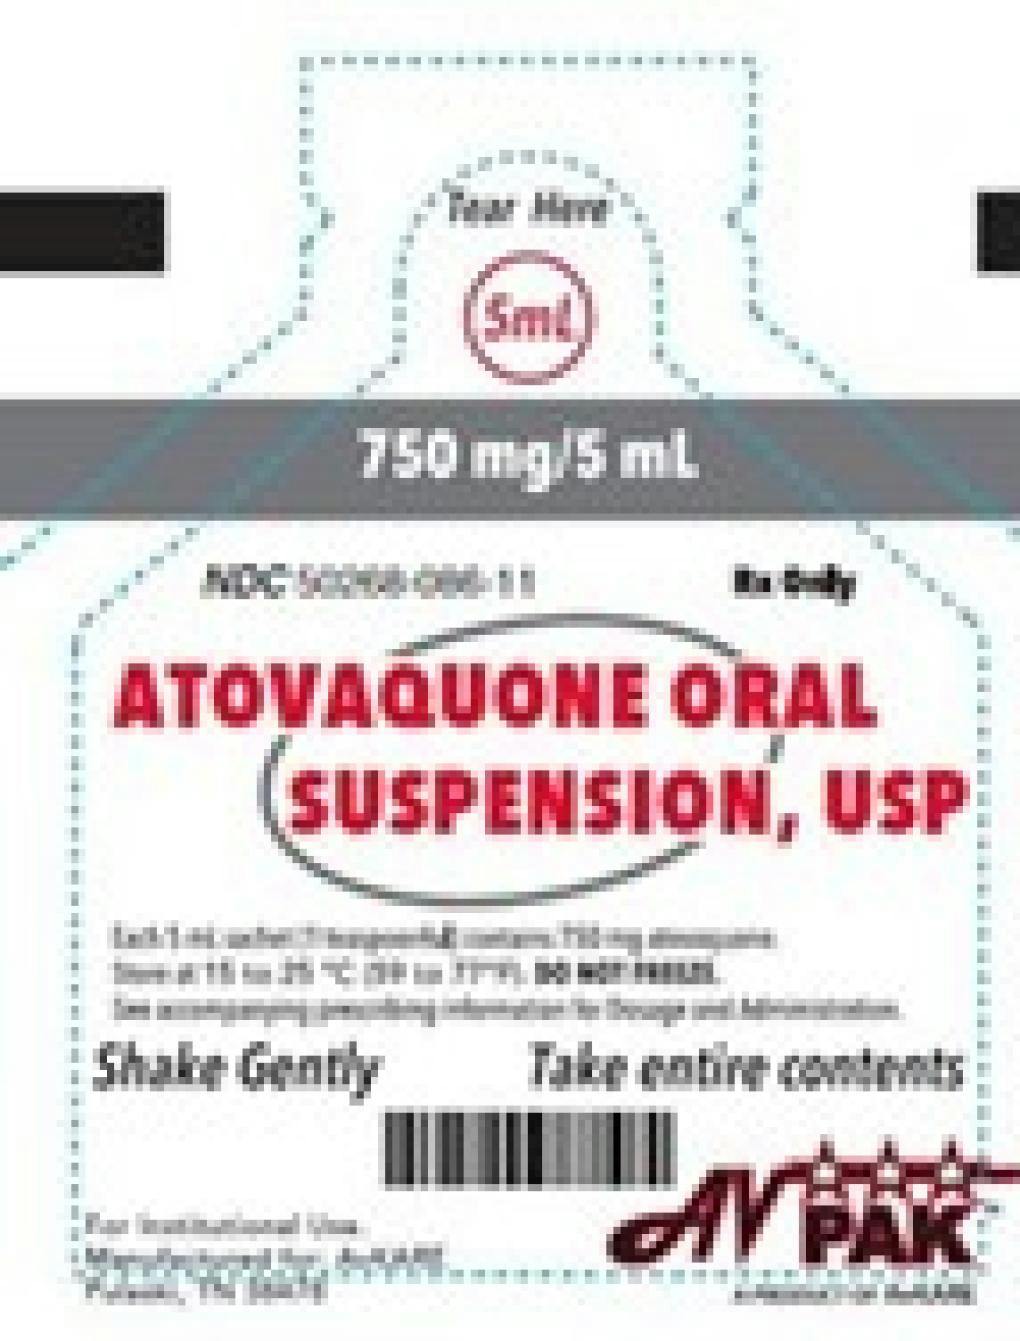 Potential Contamination Leads to Recall of Atovaquone